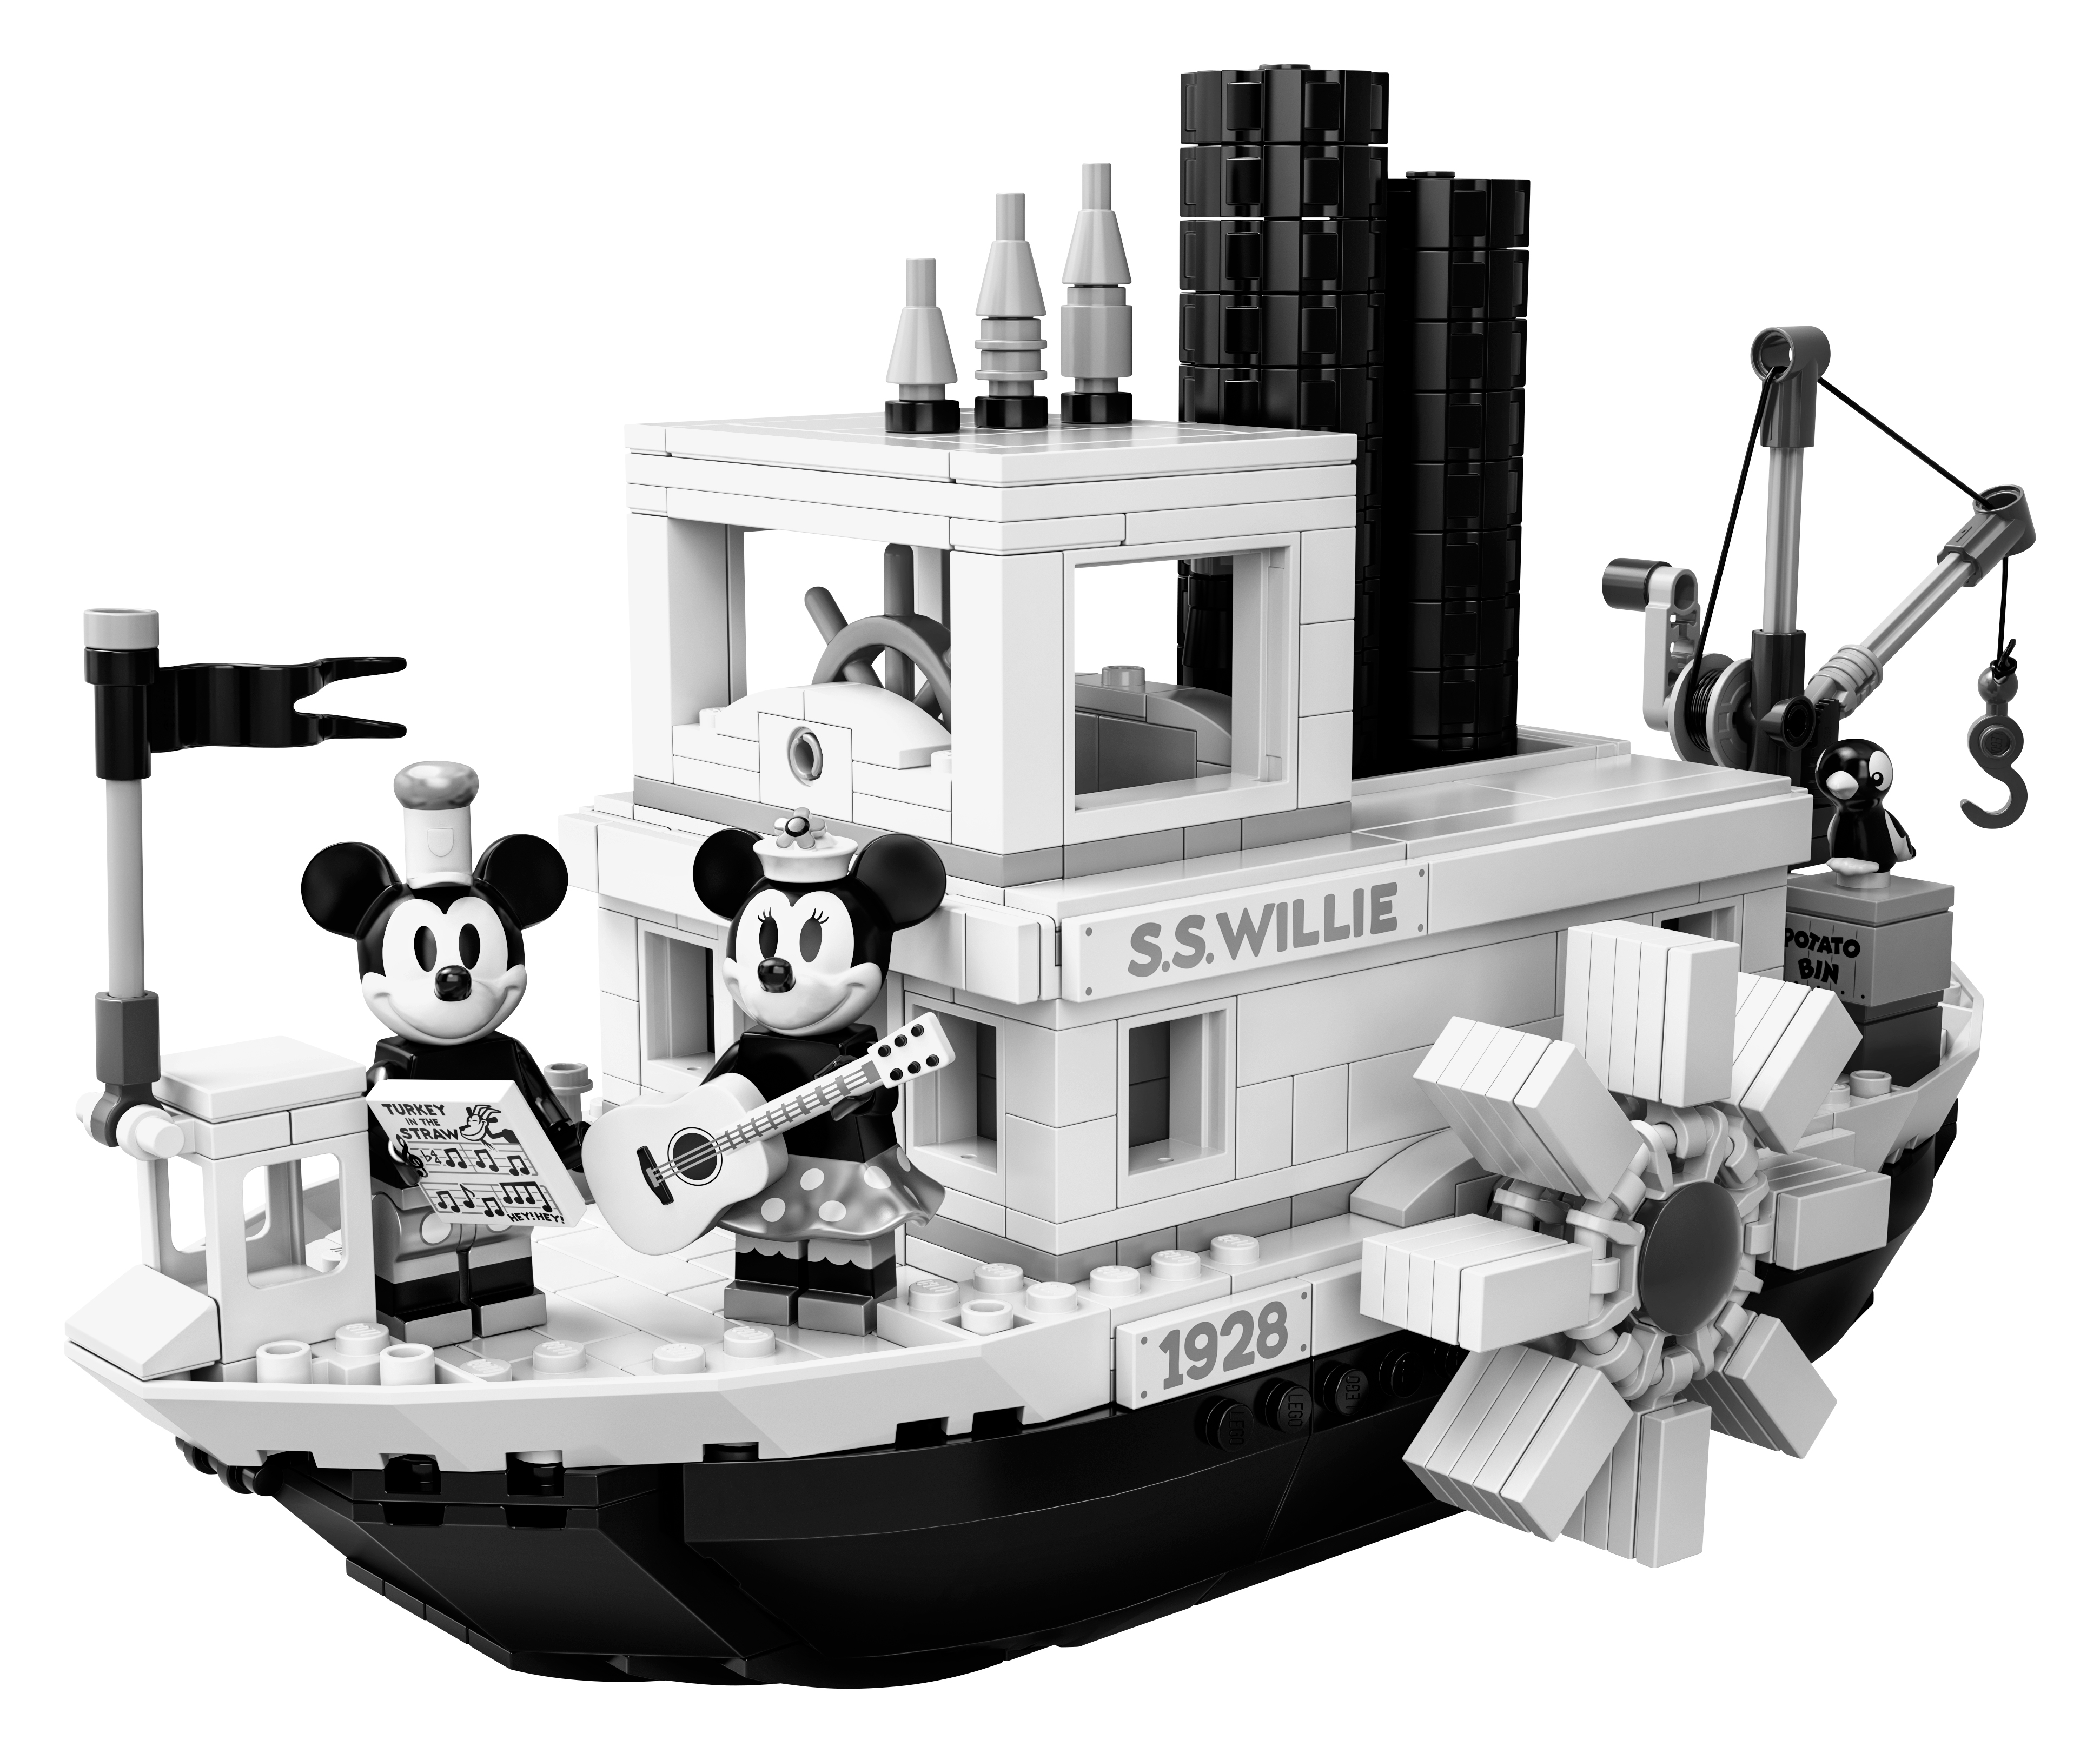 Genuine Disney Lego Minifigures Mickey Mouse & Minnie Mouse Steamboat Willie 